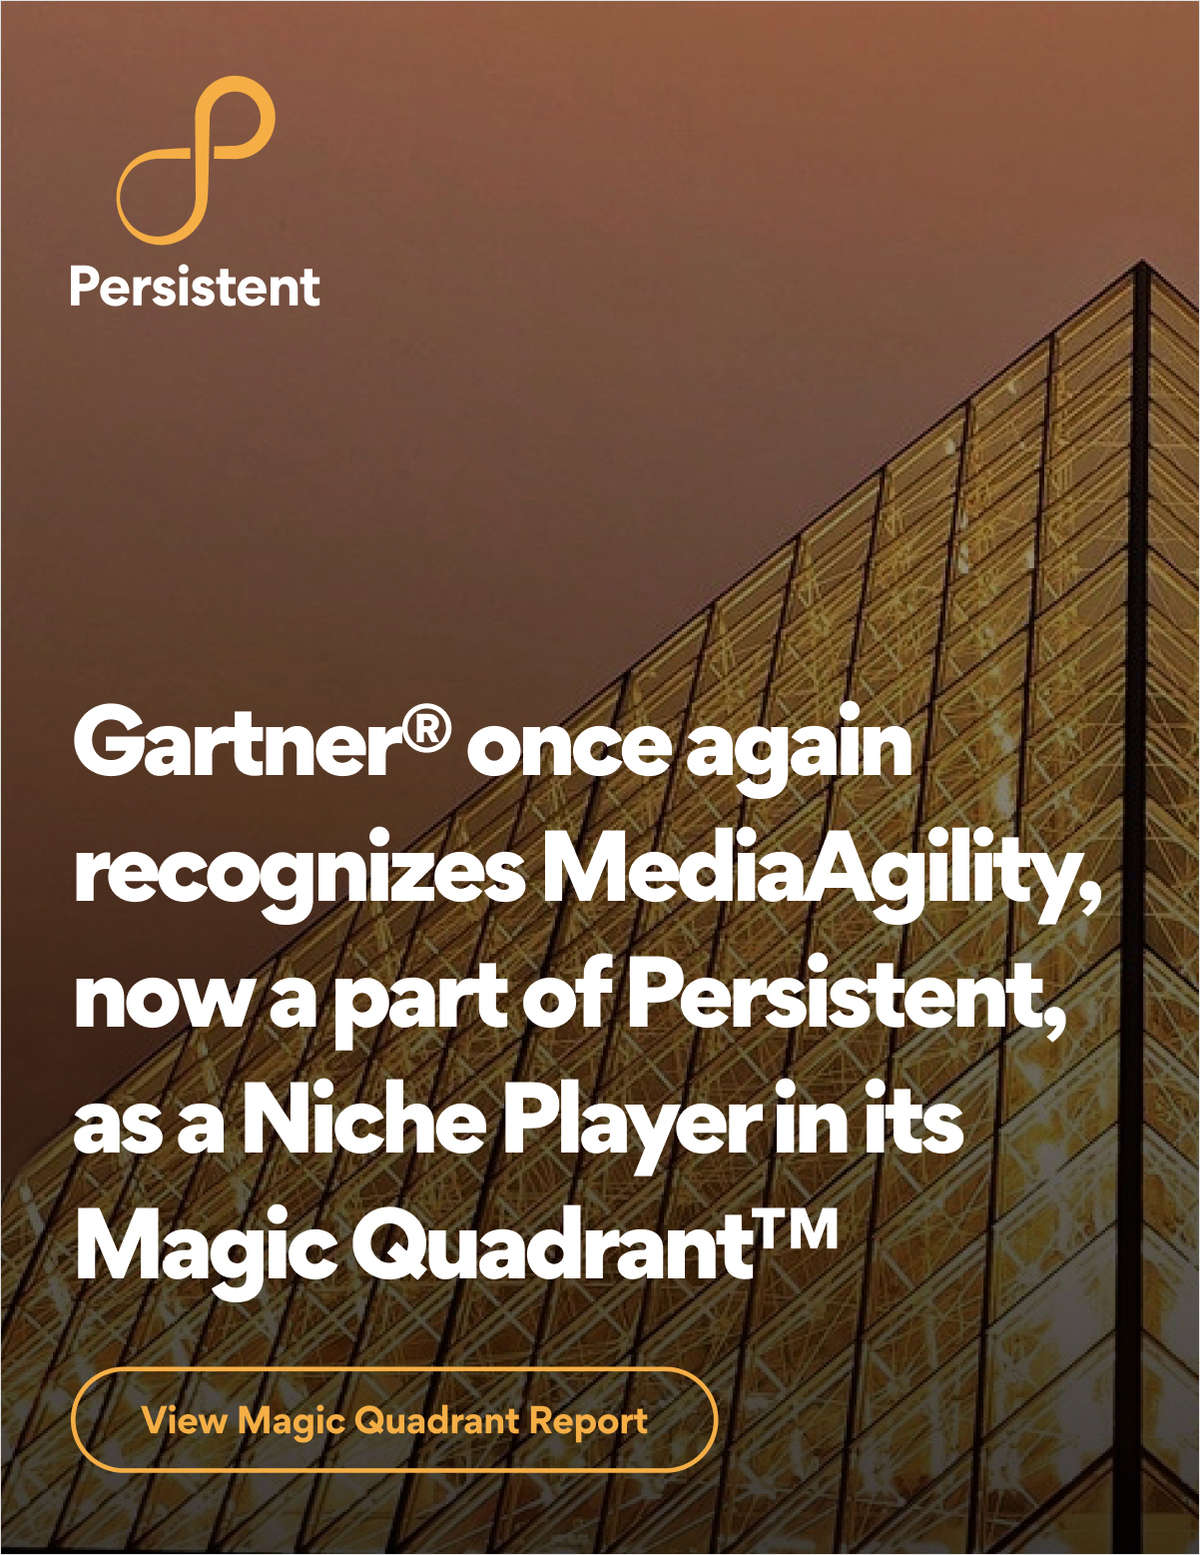 Cloud transformation on your agenda? See why Persistent's acquisition was recognized in Magic Quadrant for Cloud IT Transformation Services.